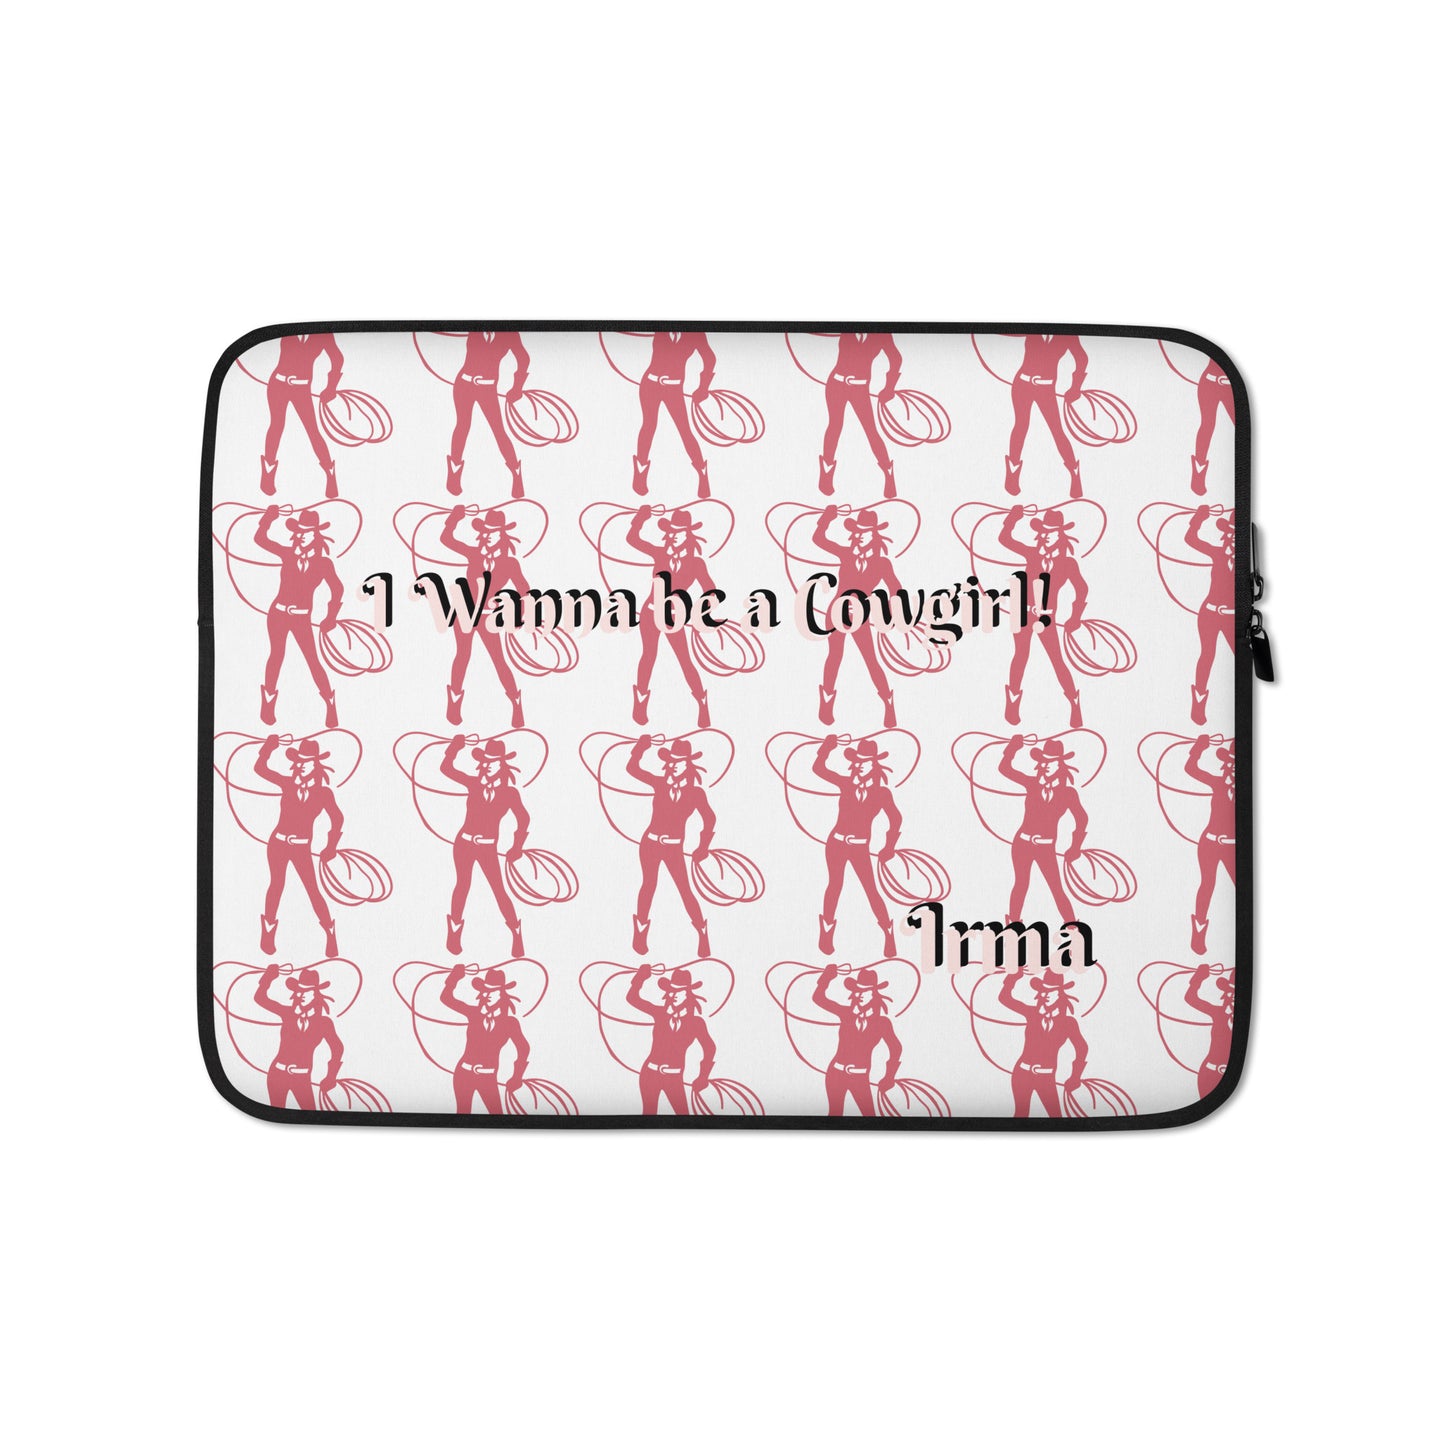 I wanna be a Cowgirl by Irma Laptop Sleeve